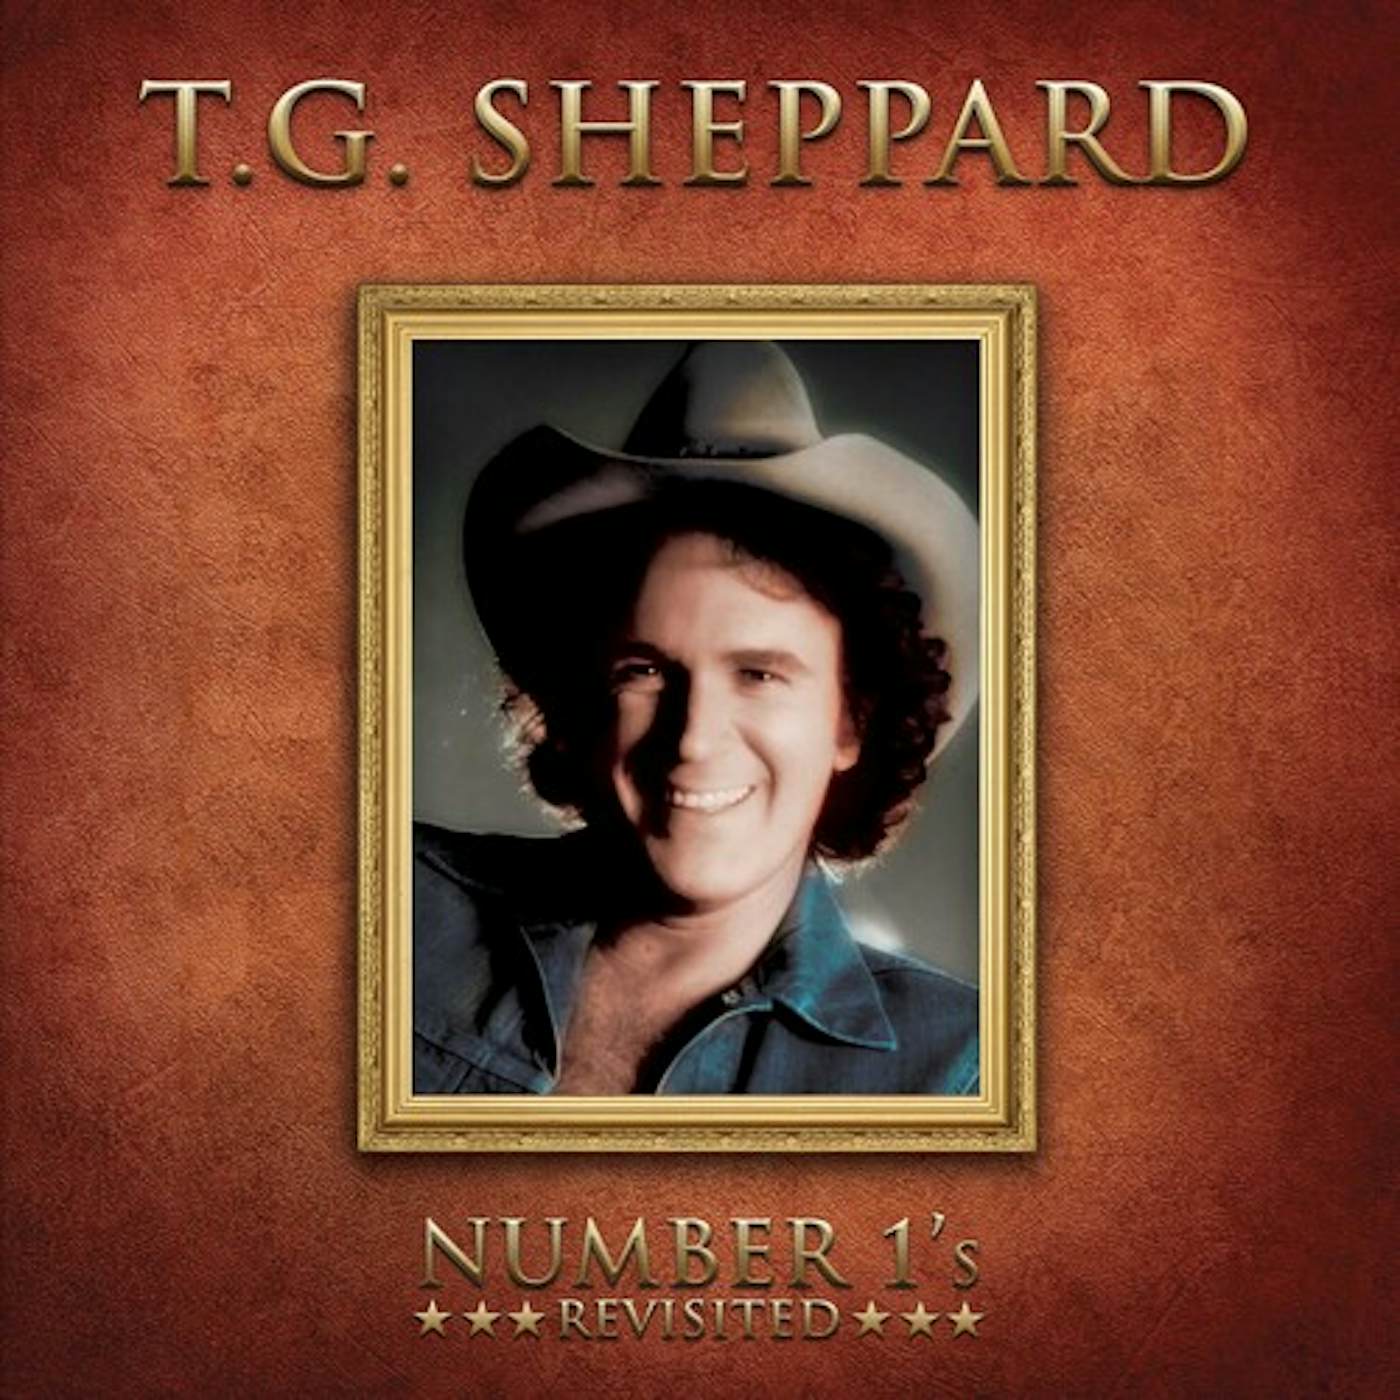 T.G. Sheppard NUMBER 1'S REVISITED - GOLD Vinyl Record